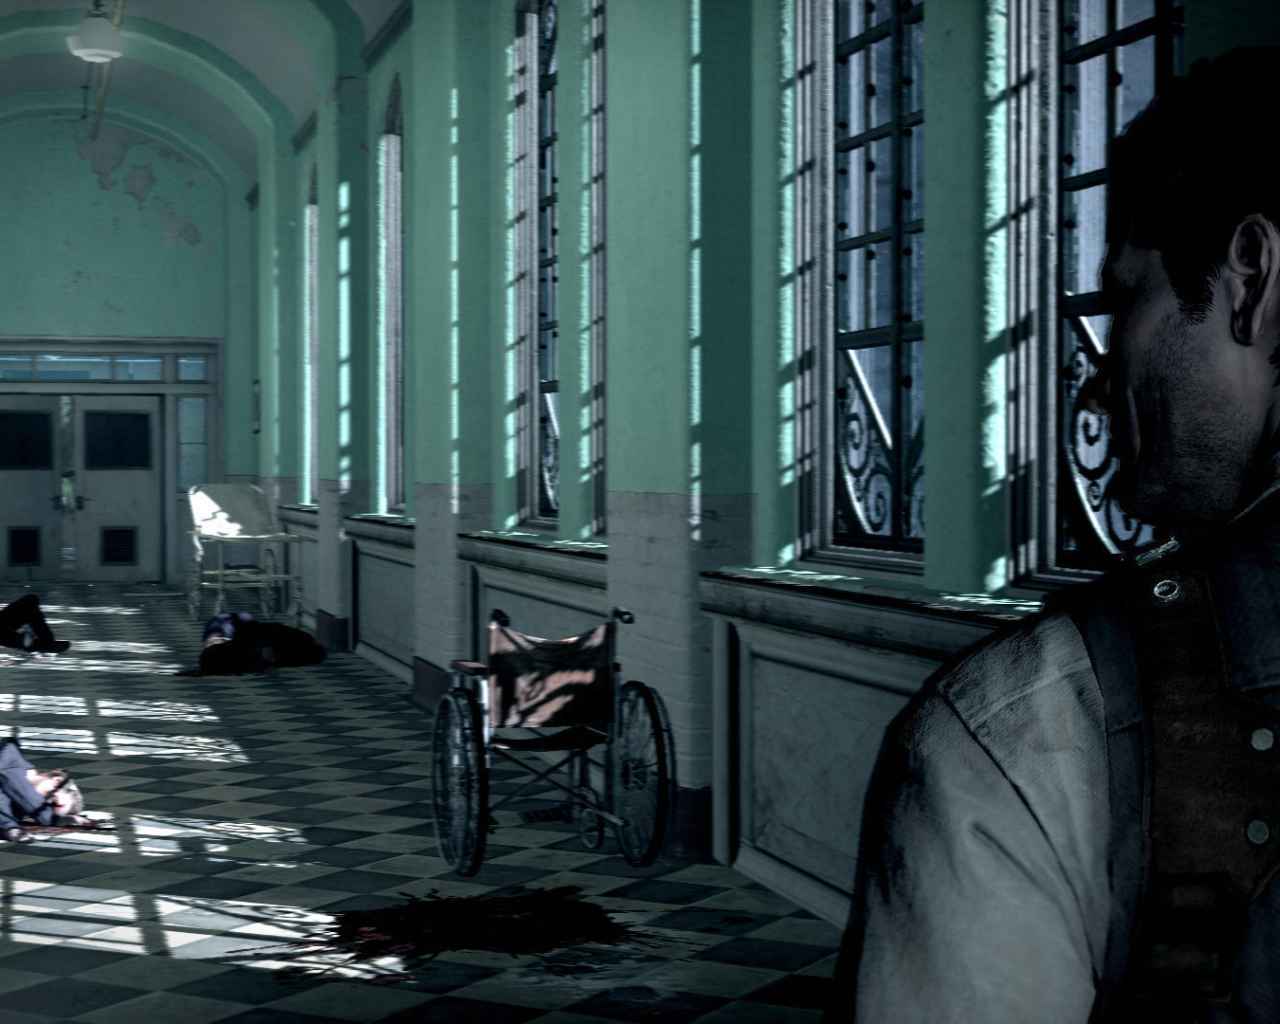 The World Game The evil within